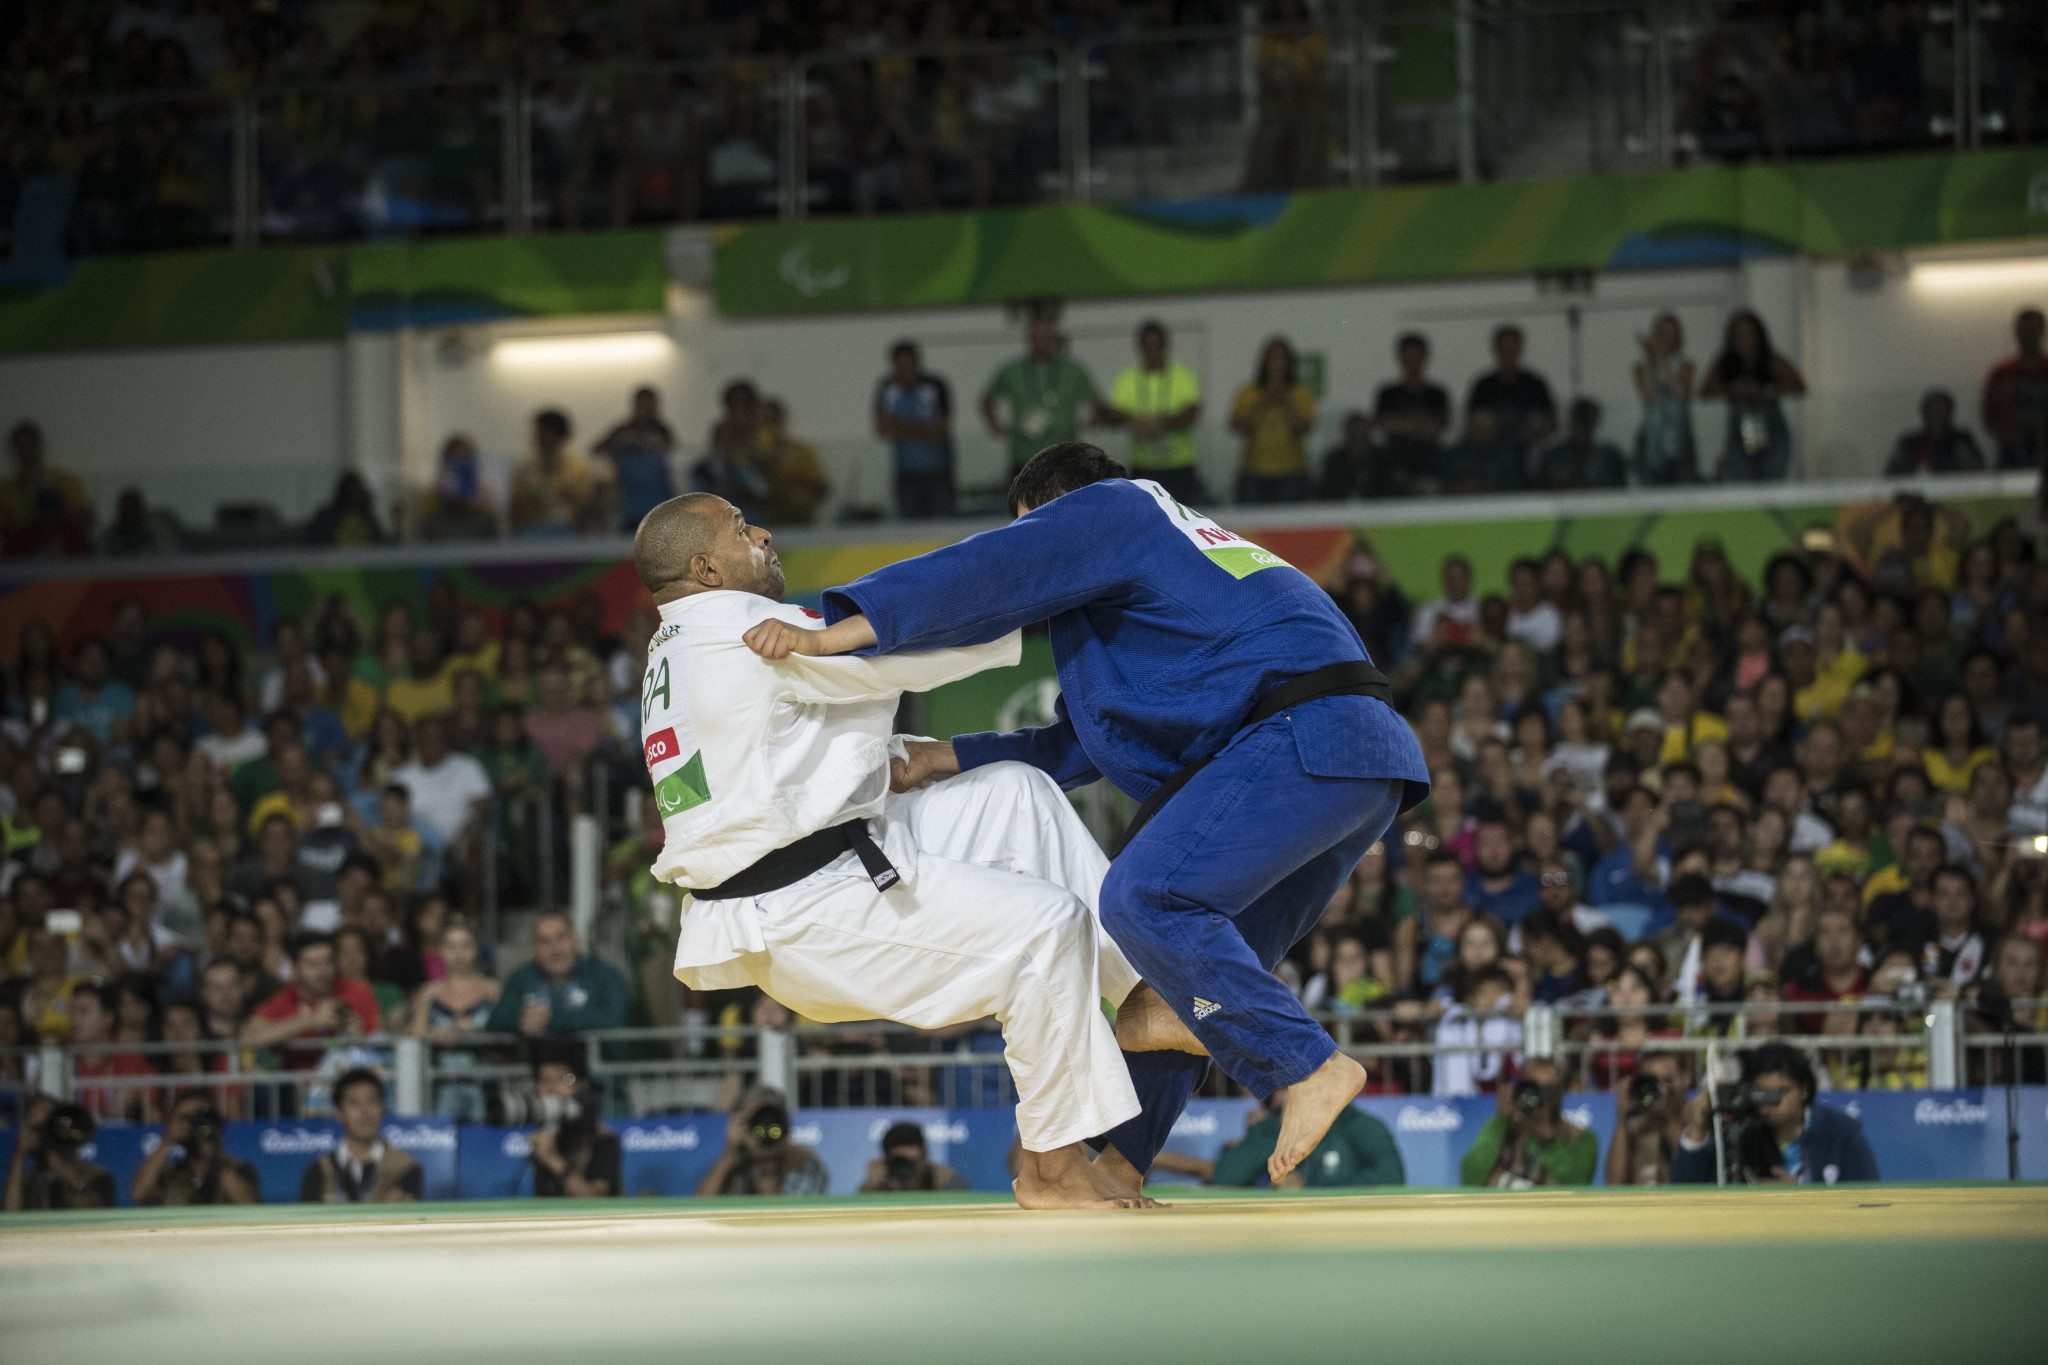 Brazil's Antonio Tonorio and Choi Gwang-geun of South Korea in action during the men's under-100kg contest at the Rio 2016 Paralympic Games ©Getty Images